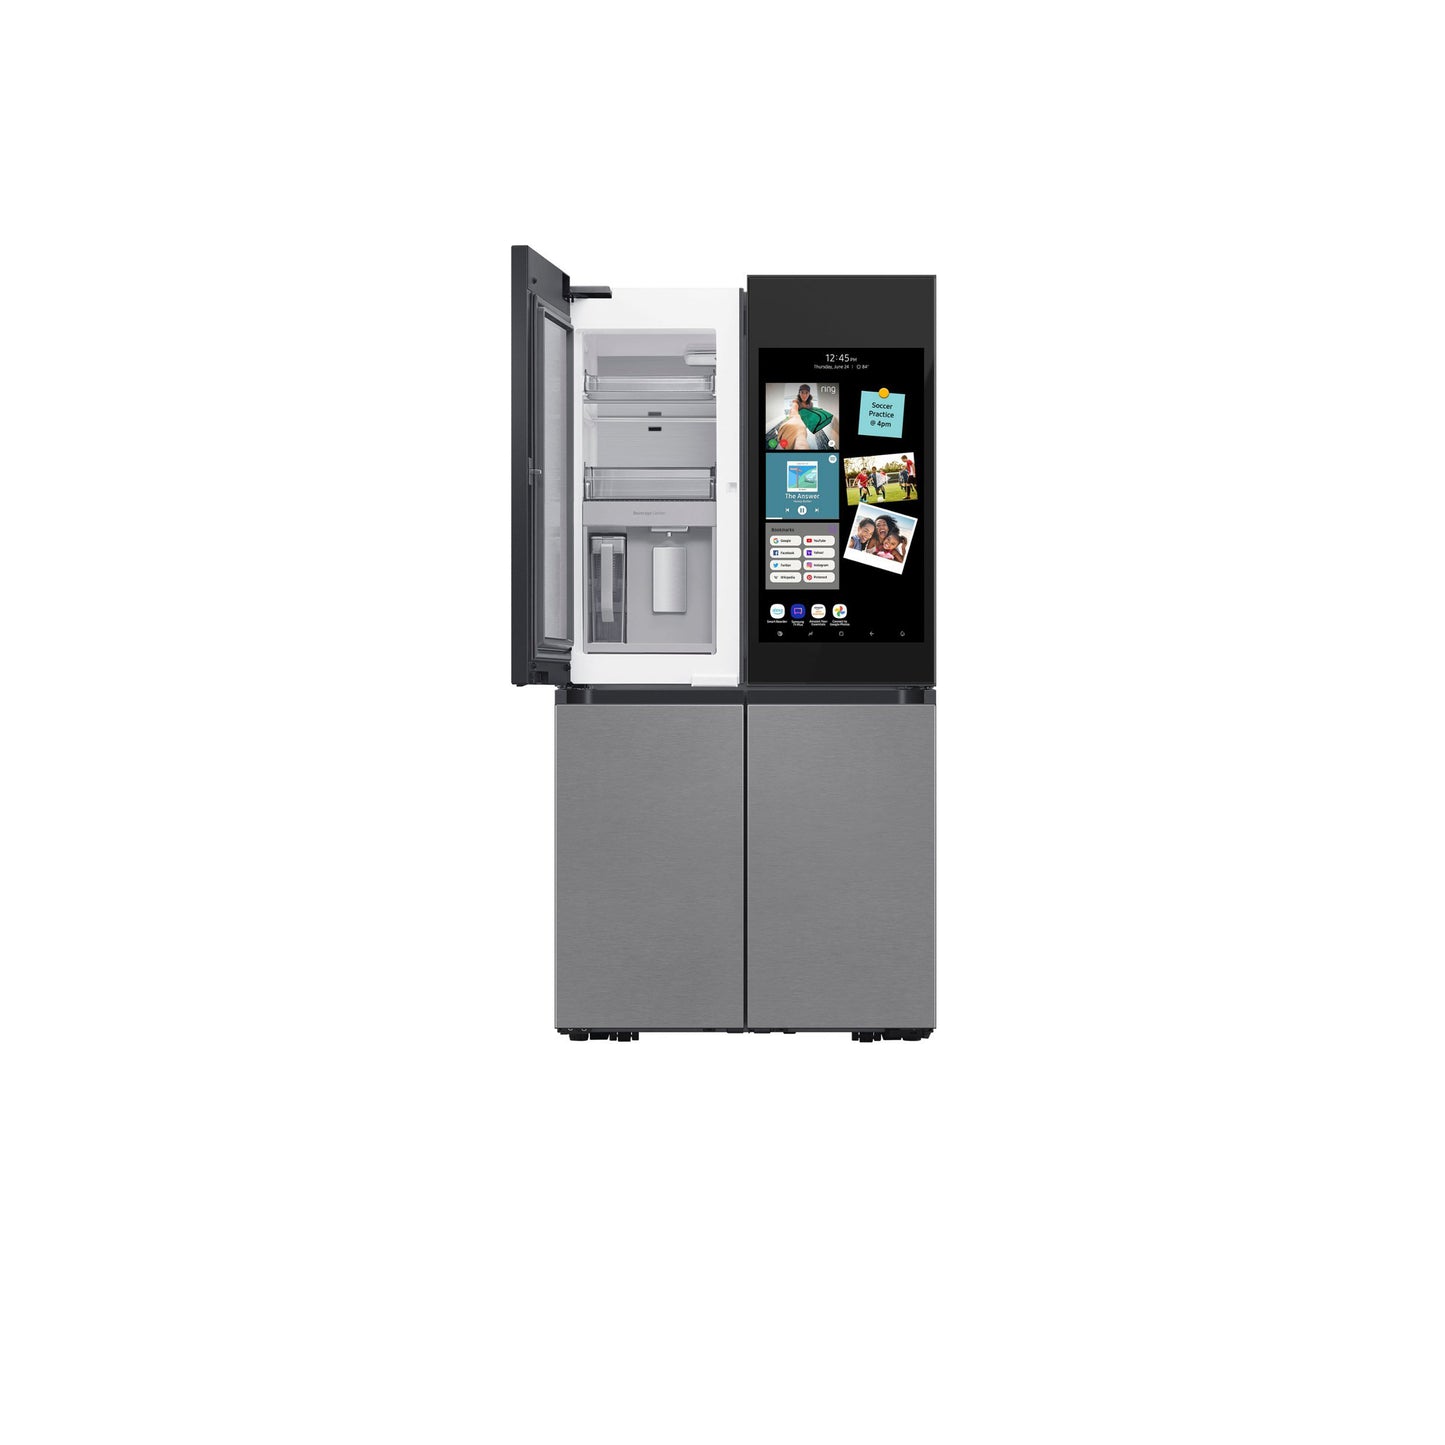 Bespoke 4-Door Flex™ Refrigerator (29 cu. ft.) with Family Hub™+ in Charcoal Glass Top and Stainless Steel Bottom Panels.